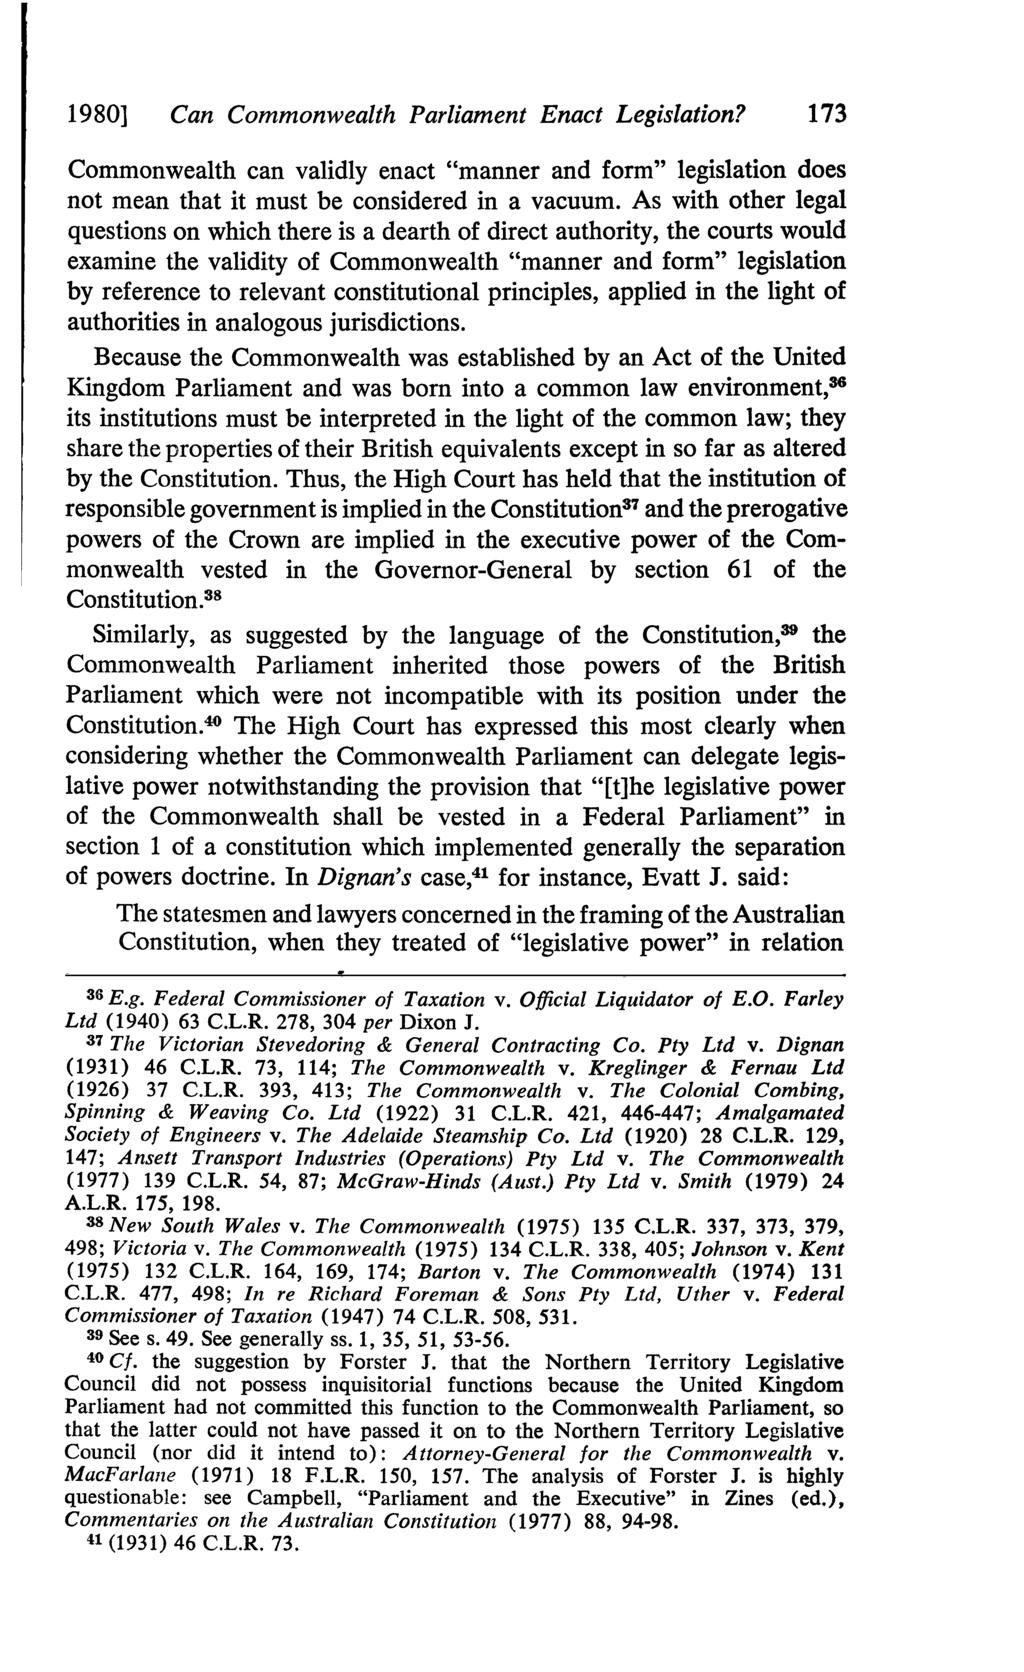 1980] Can Commonwealth Parliament Enact Legislation? 173 Commonwealth can validly enact "manner and form" legislation does not mean that it must be considered in a vacuum.